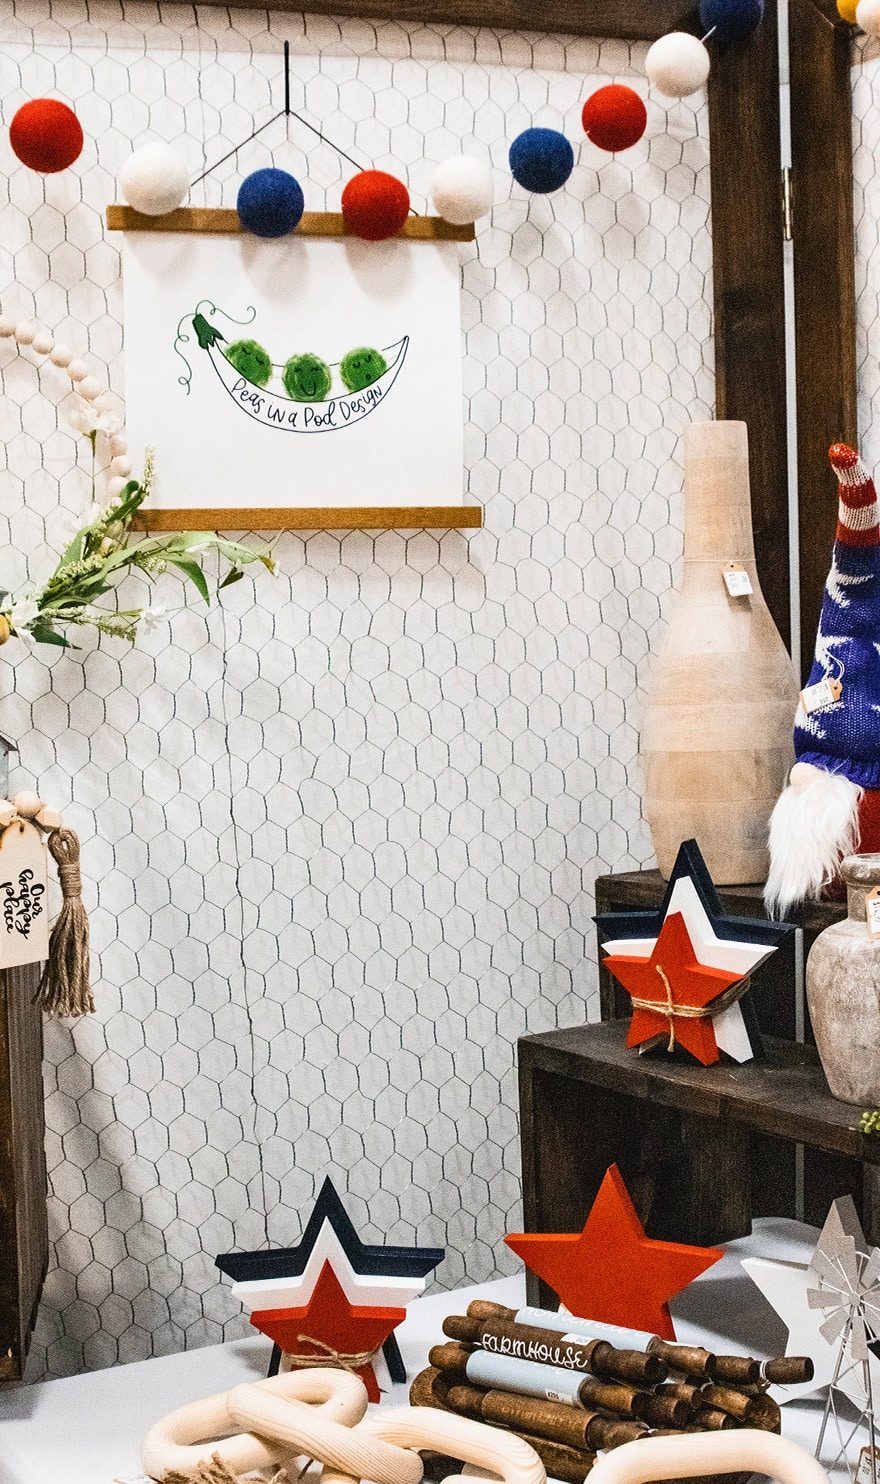 Handmade home decor sits on display on stands in the Peas in a Pod Design booth.